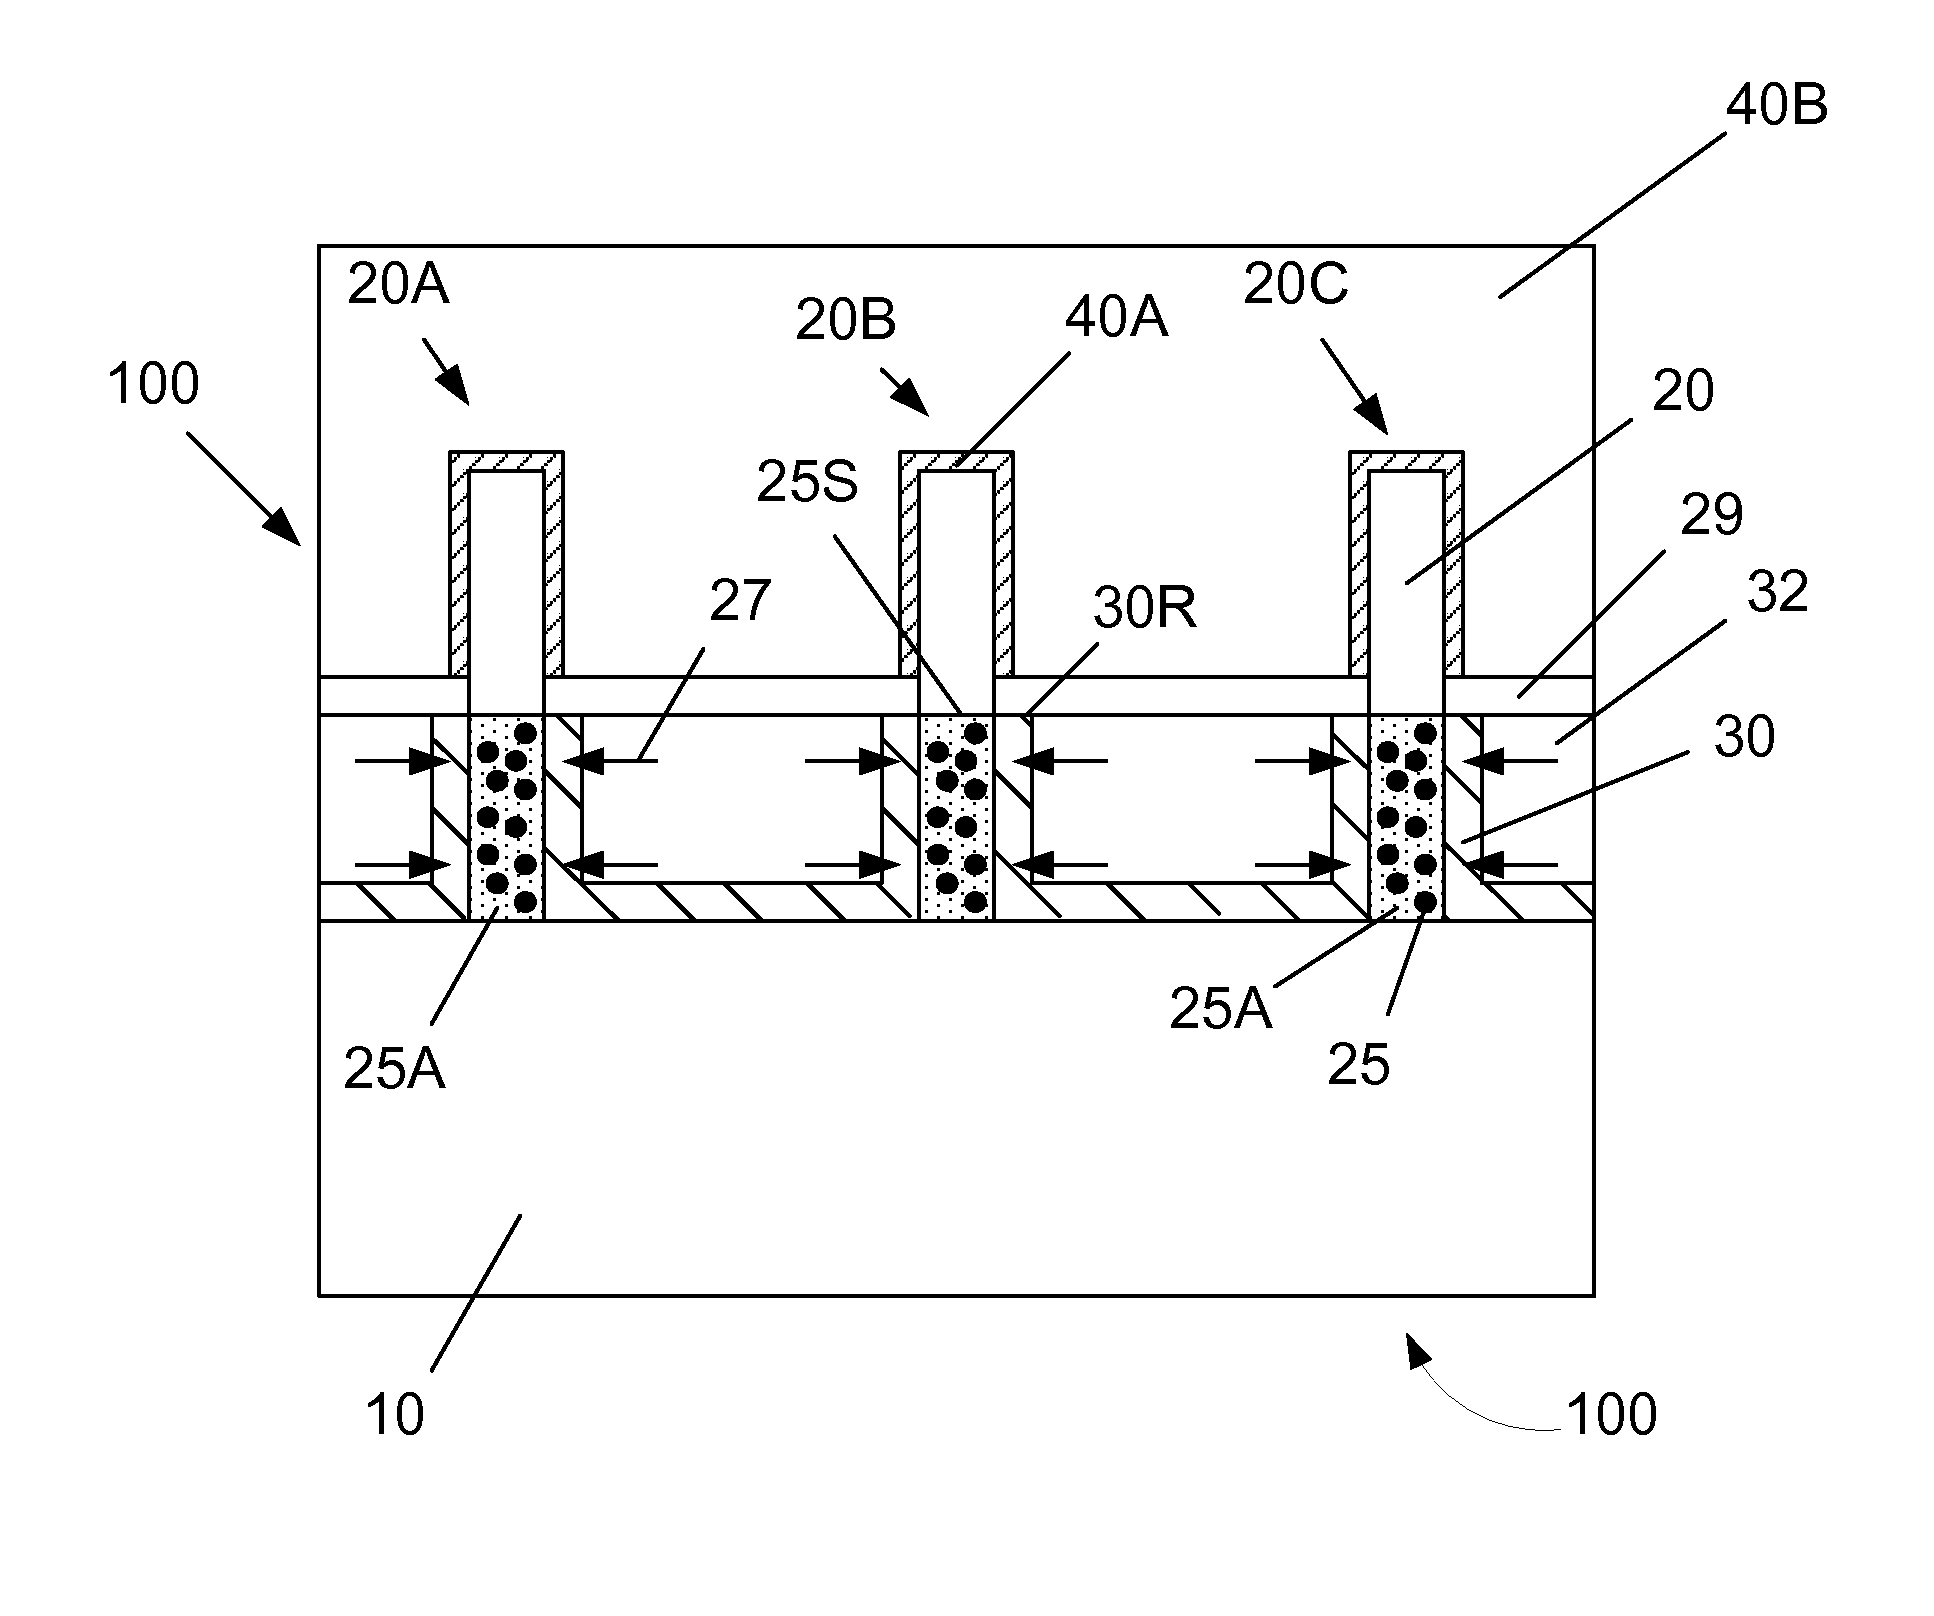 Methods of forming bulk finfet devices so as to reduce punch through leakage currents